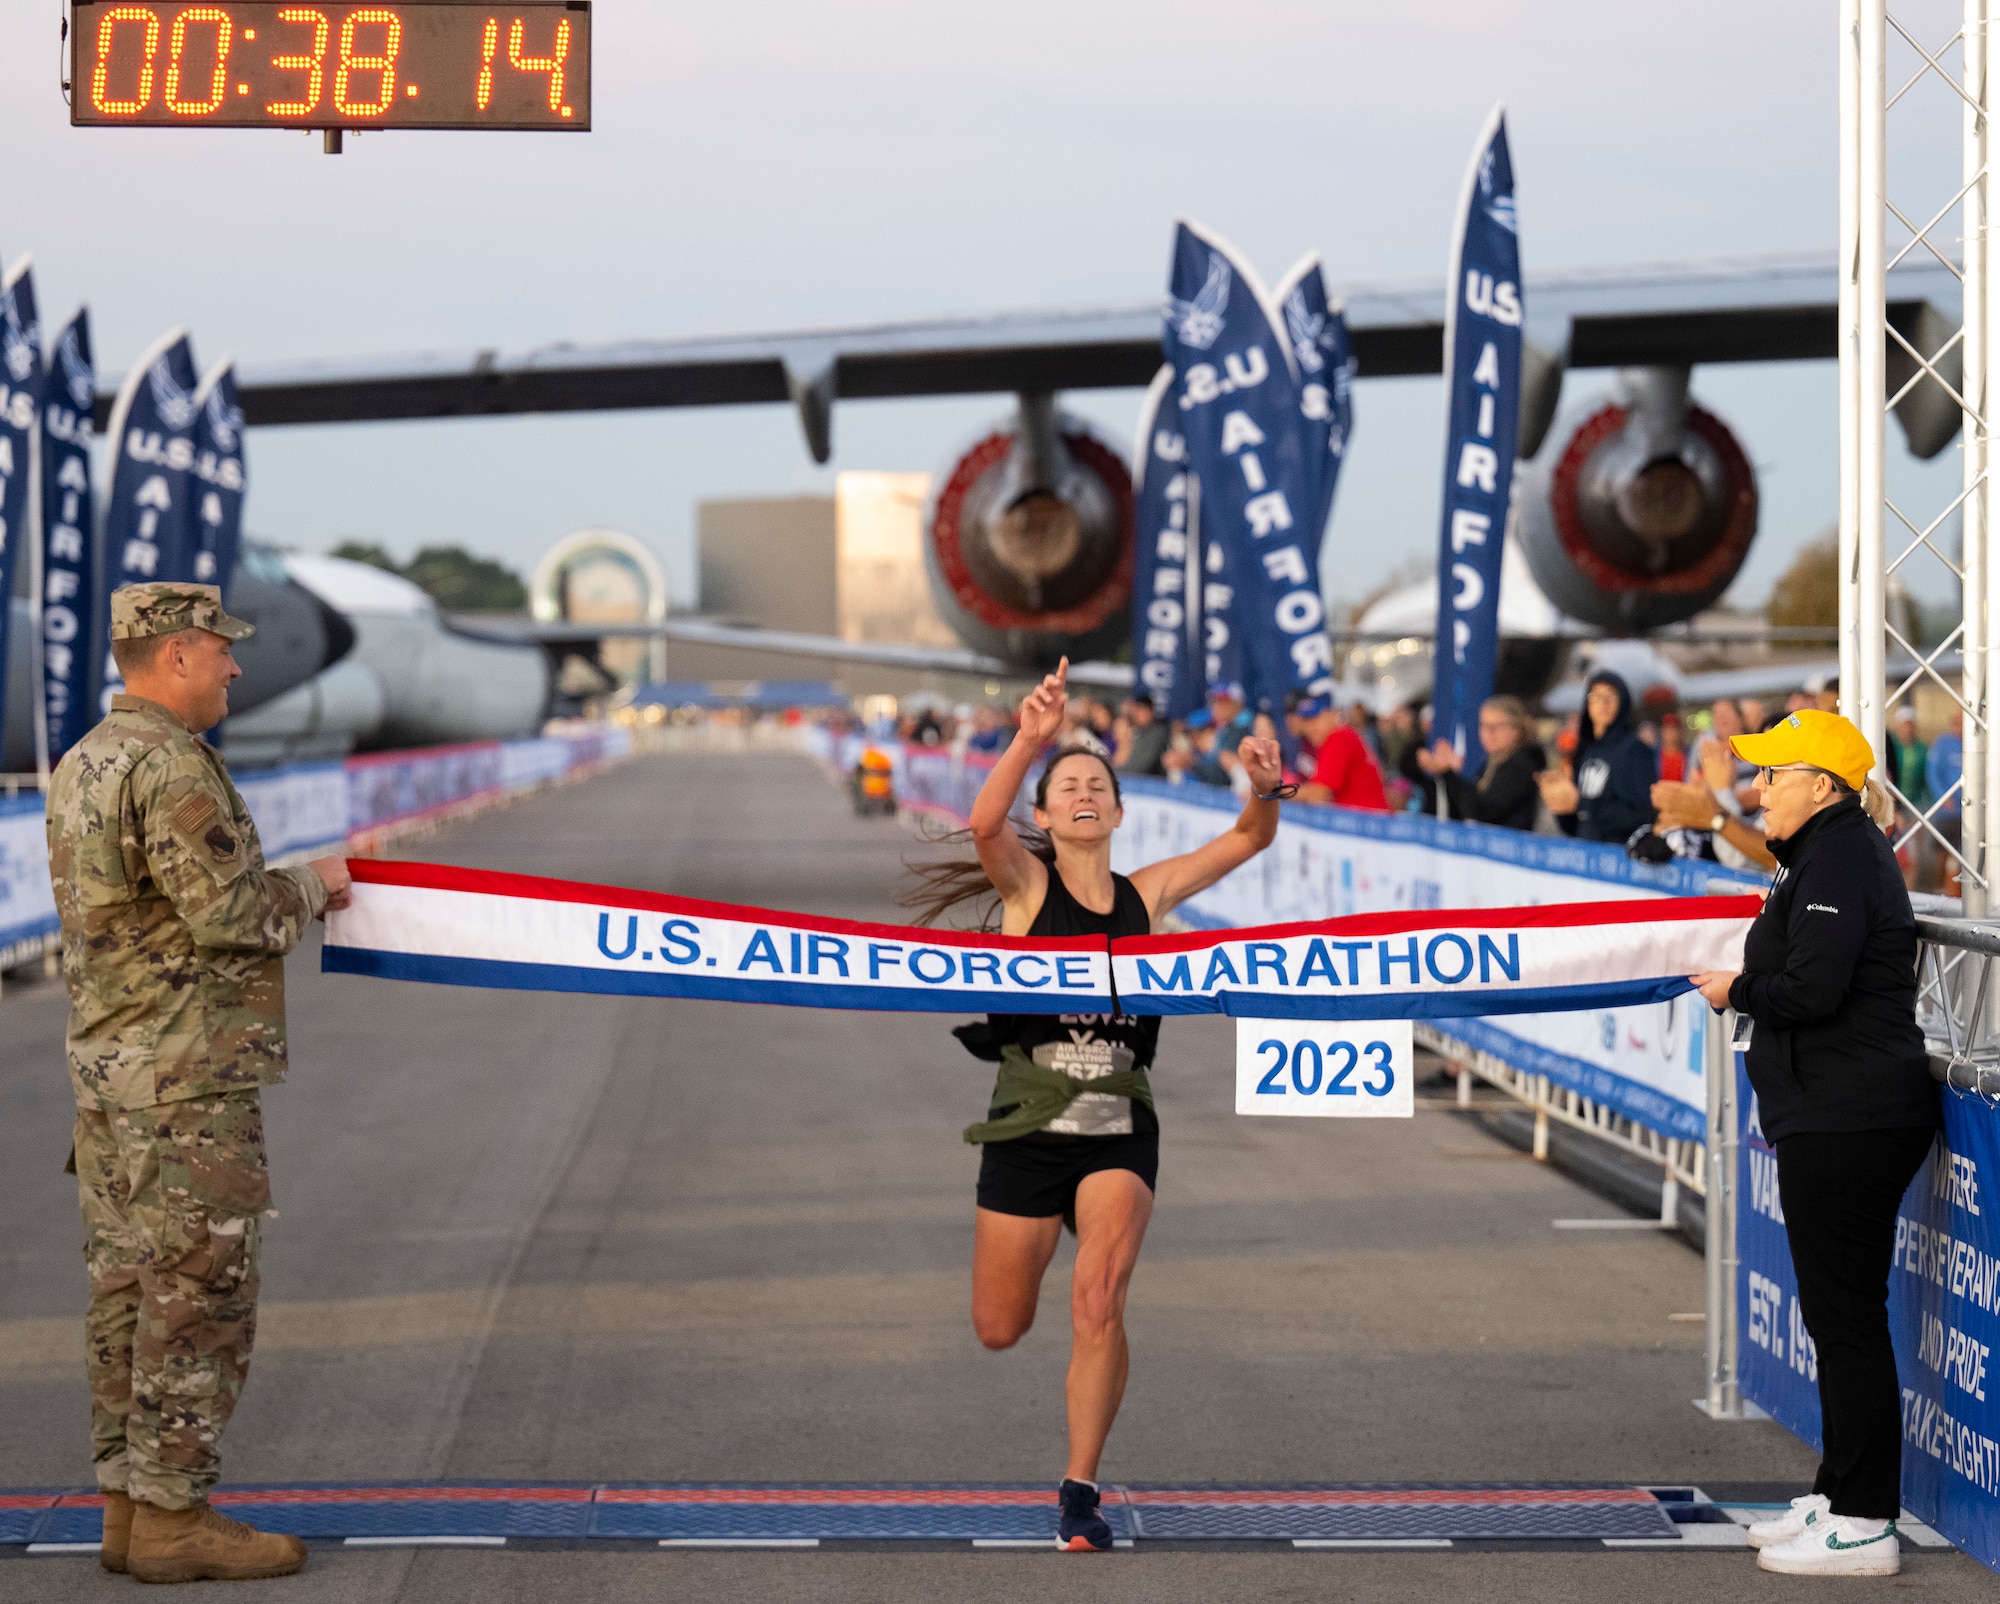 A woman in black athletic clothes raises her arms as she approaches a red, white and blue banner with "U.S. Air Force Marathon" on it.